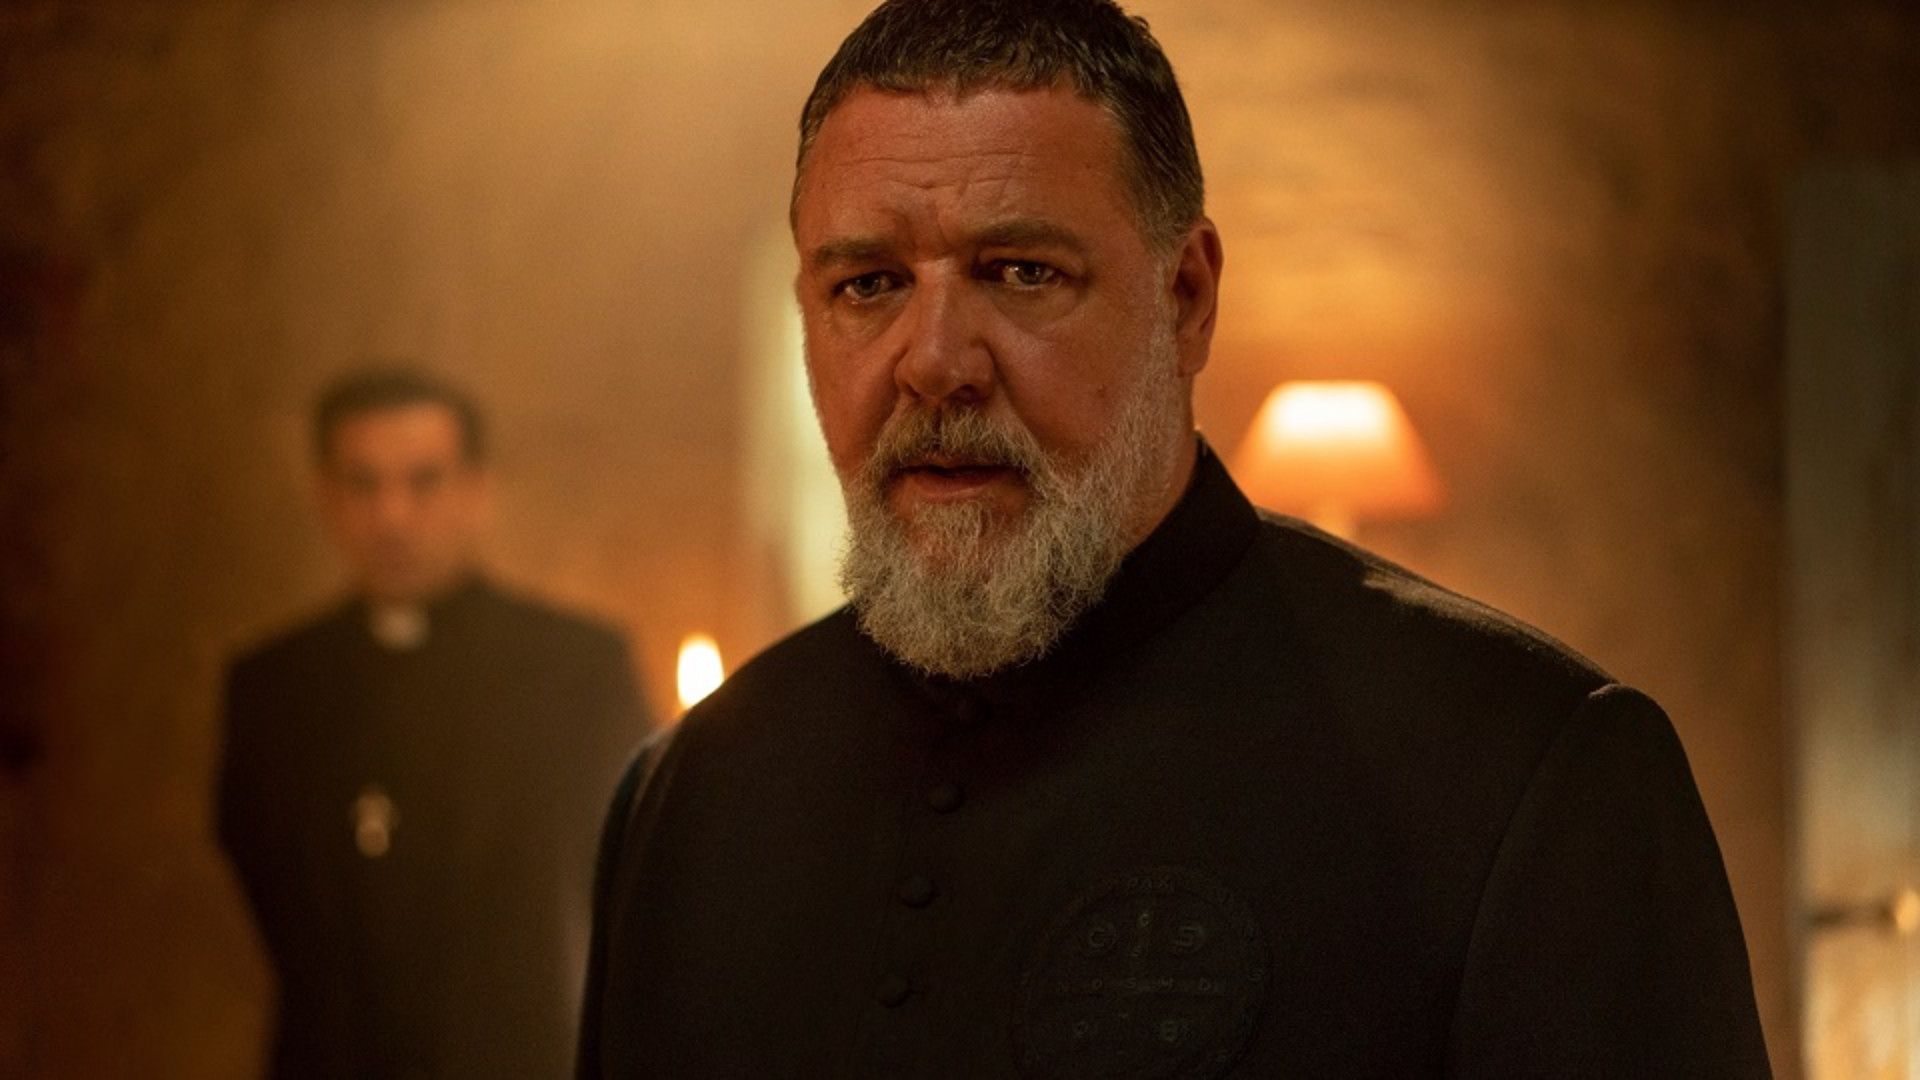 Russell Crowe as Father Gabriele Amorth in The Pope's Exorcist